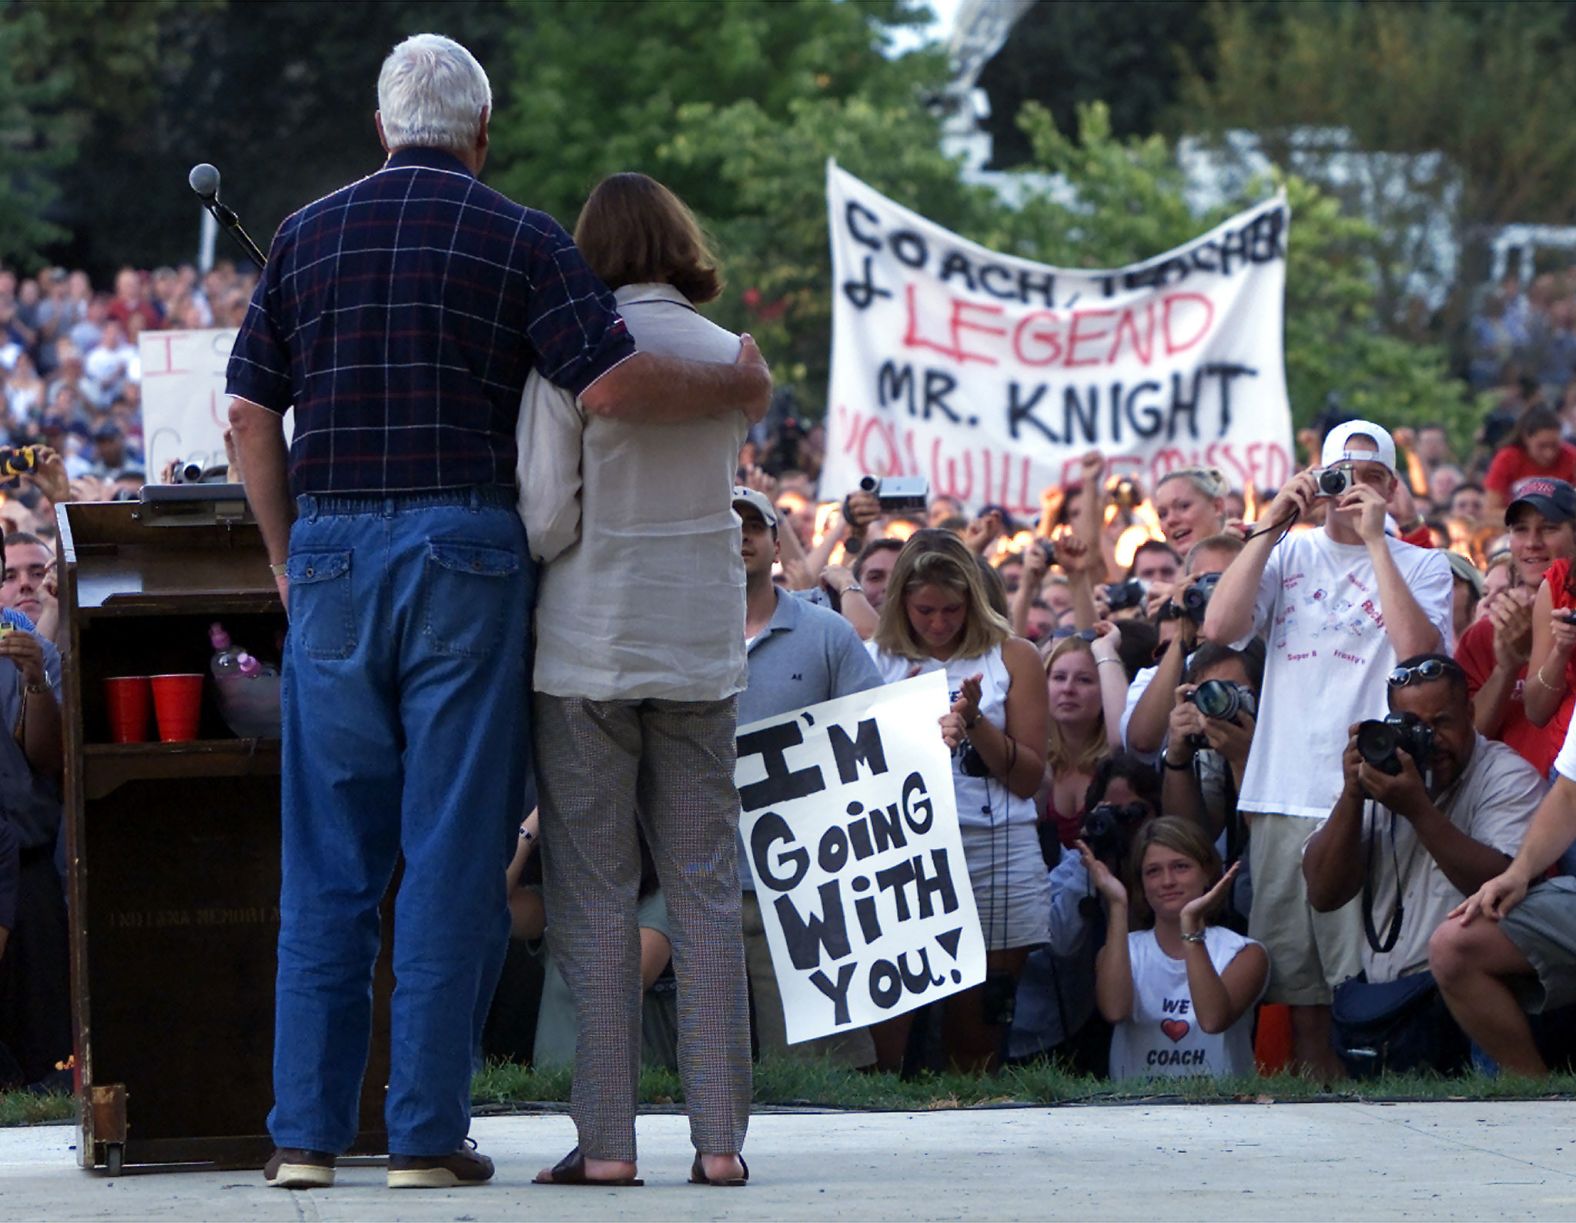 Knight stands with his wife Karen after addressing Indiana University students after being fired in 2000. Indiana dismissed Knight after what the school said at the time was "<a href="https://www.cnn.com/2000/US/09/11/knight.protest/" target="_blank">a pattern of unacceptable behavior</a>."